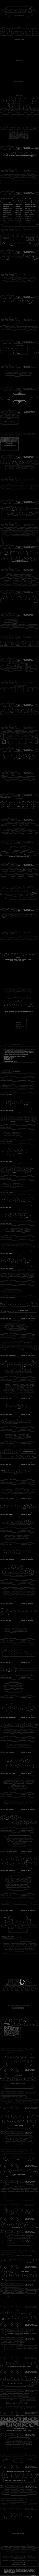 Ascii logocluster by Multiple artists